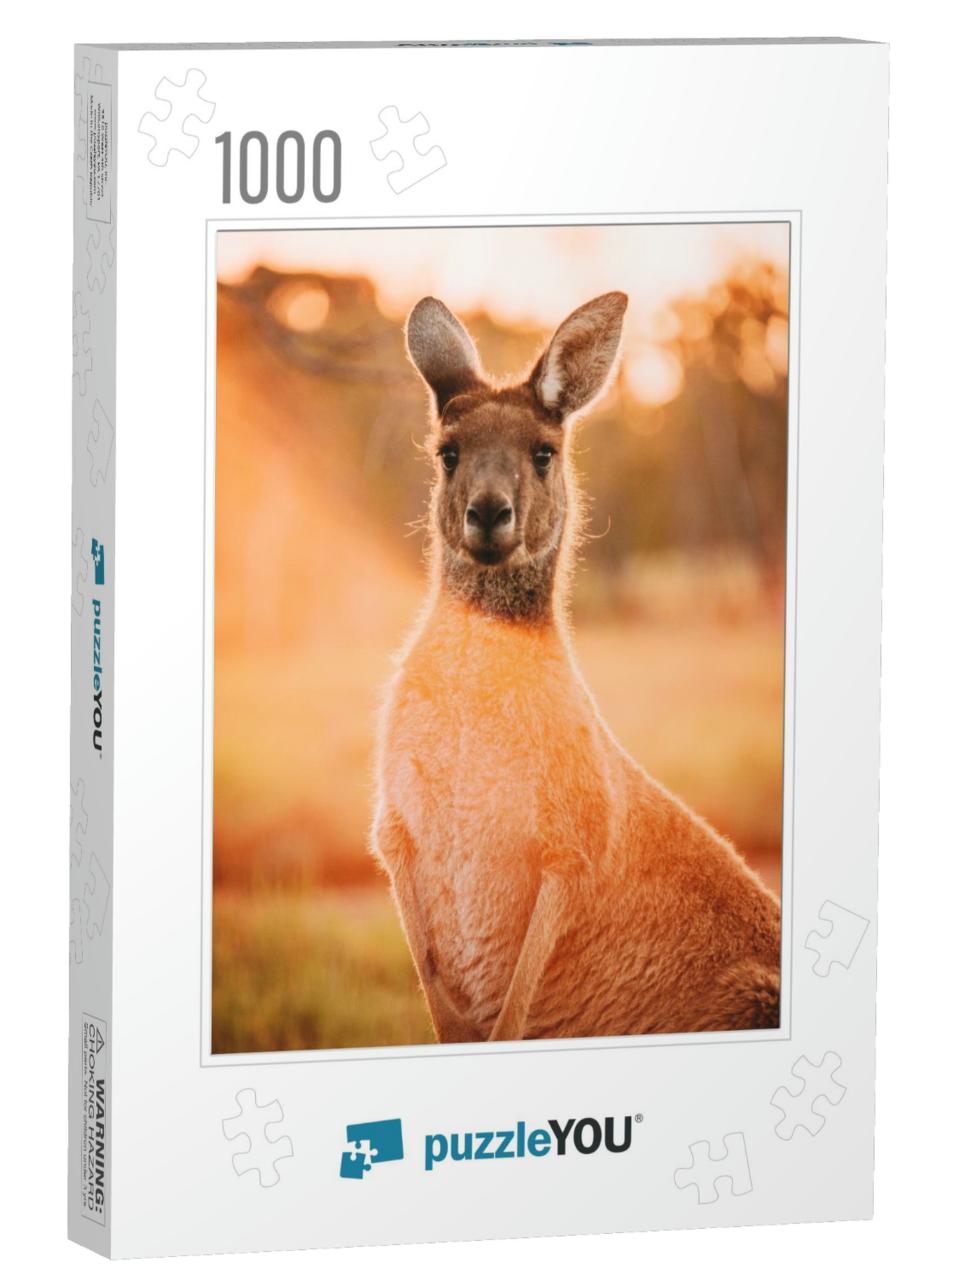 Kangaroos At Heirisson Island in Perth, Western Australia... Jigsaw Puzzle with 1000 pieces